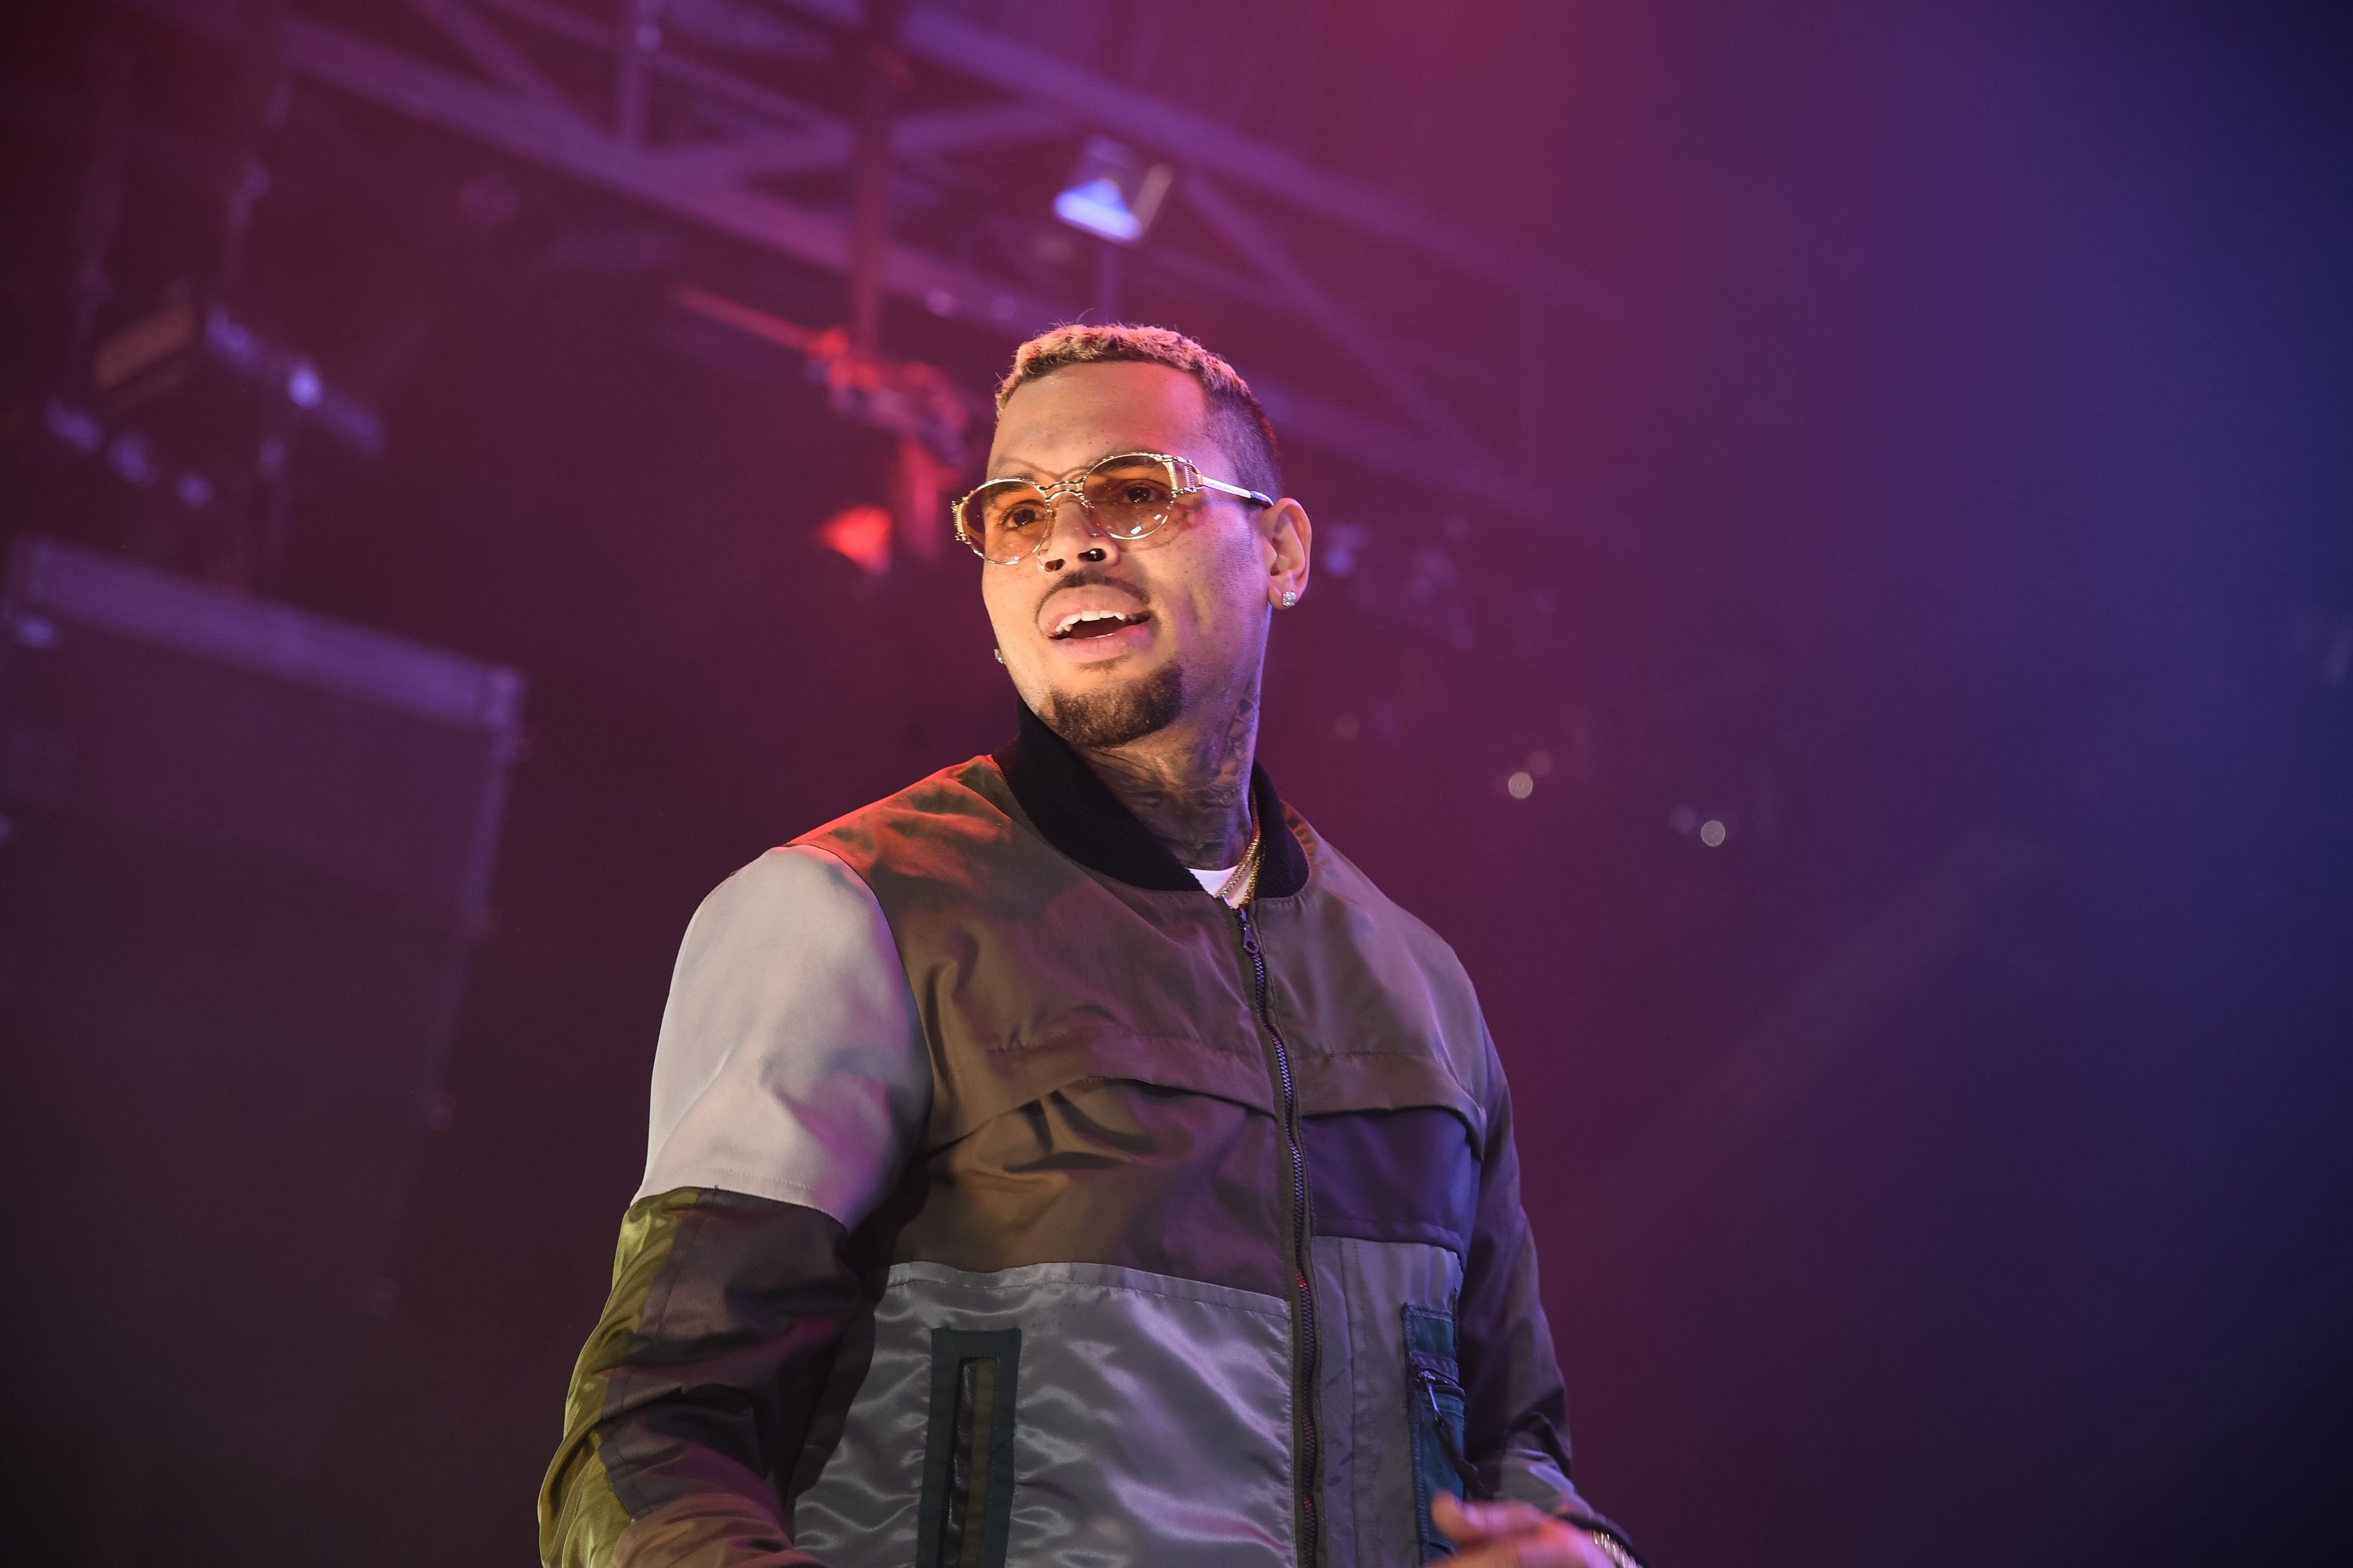 Chris Brown performs at the HOT 97 Summer Jam in June 2017 | Photo: Getty Images